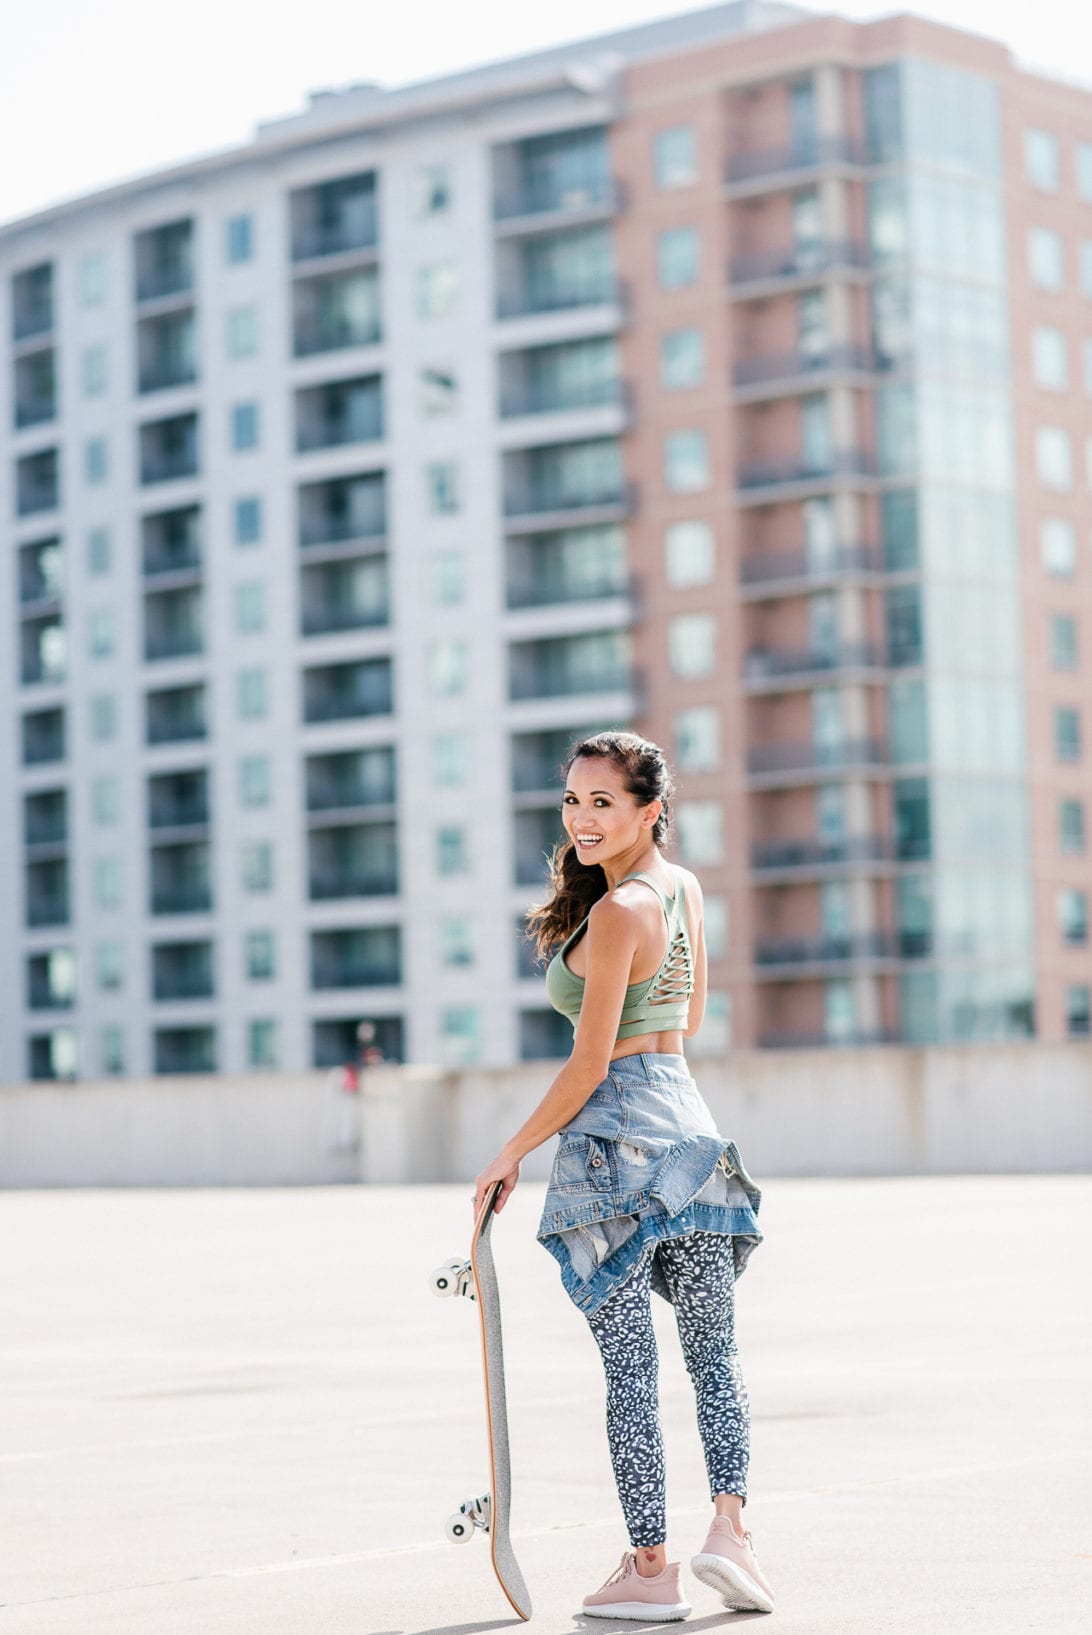 skateboard, fitness fashion, Lorna Jane Activewear, leopard tights, mommy and me style, mommy and me fashion, #boymom, #houstonblogger, street style, fearless, comfort zone, face your fears